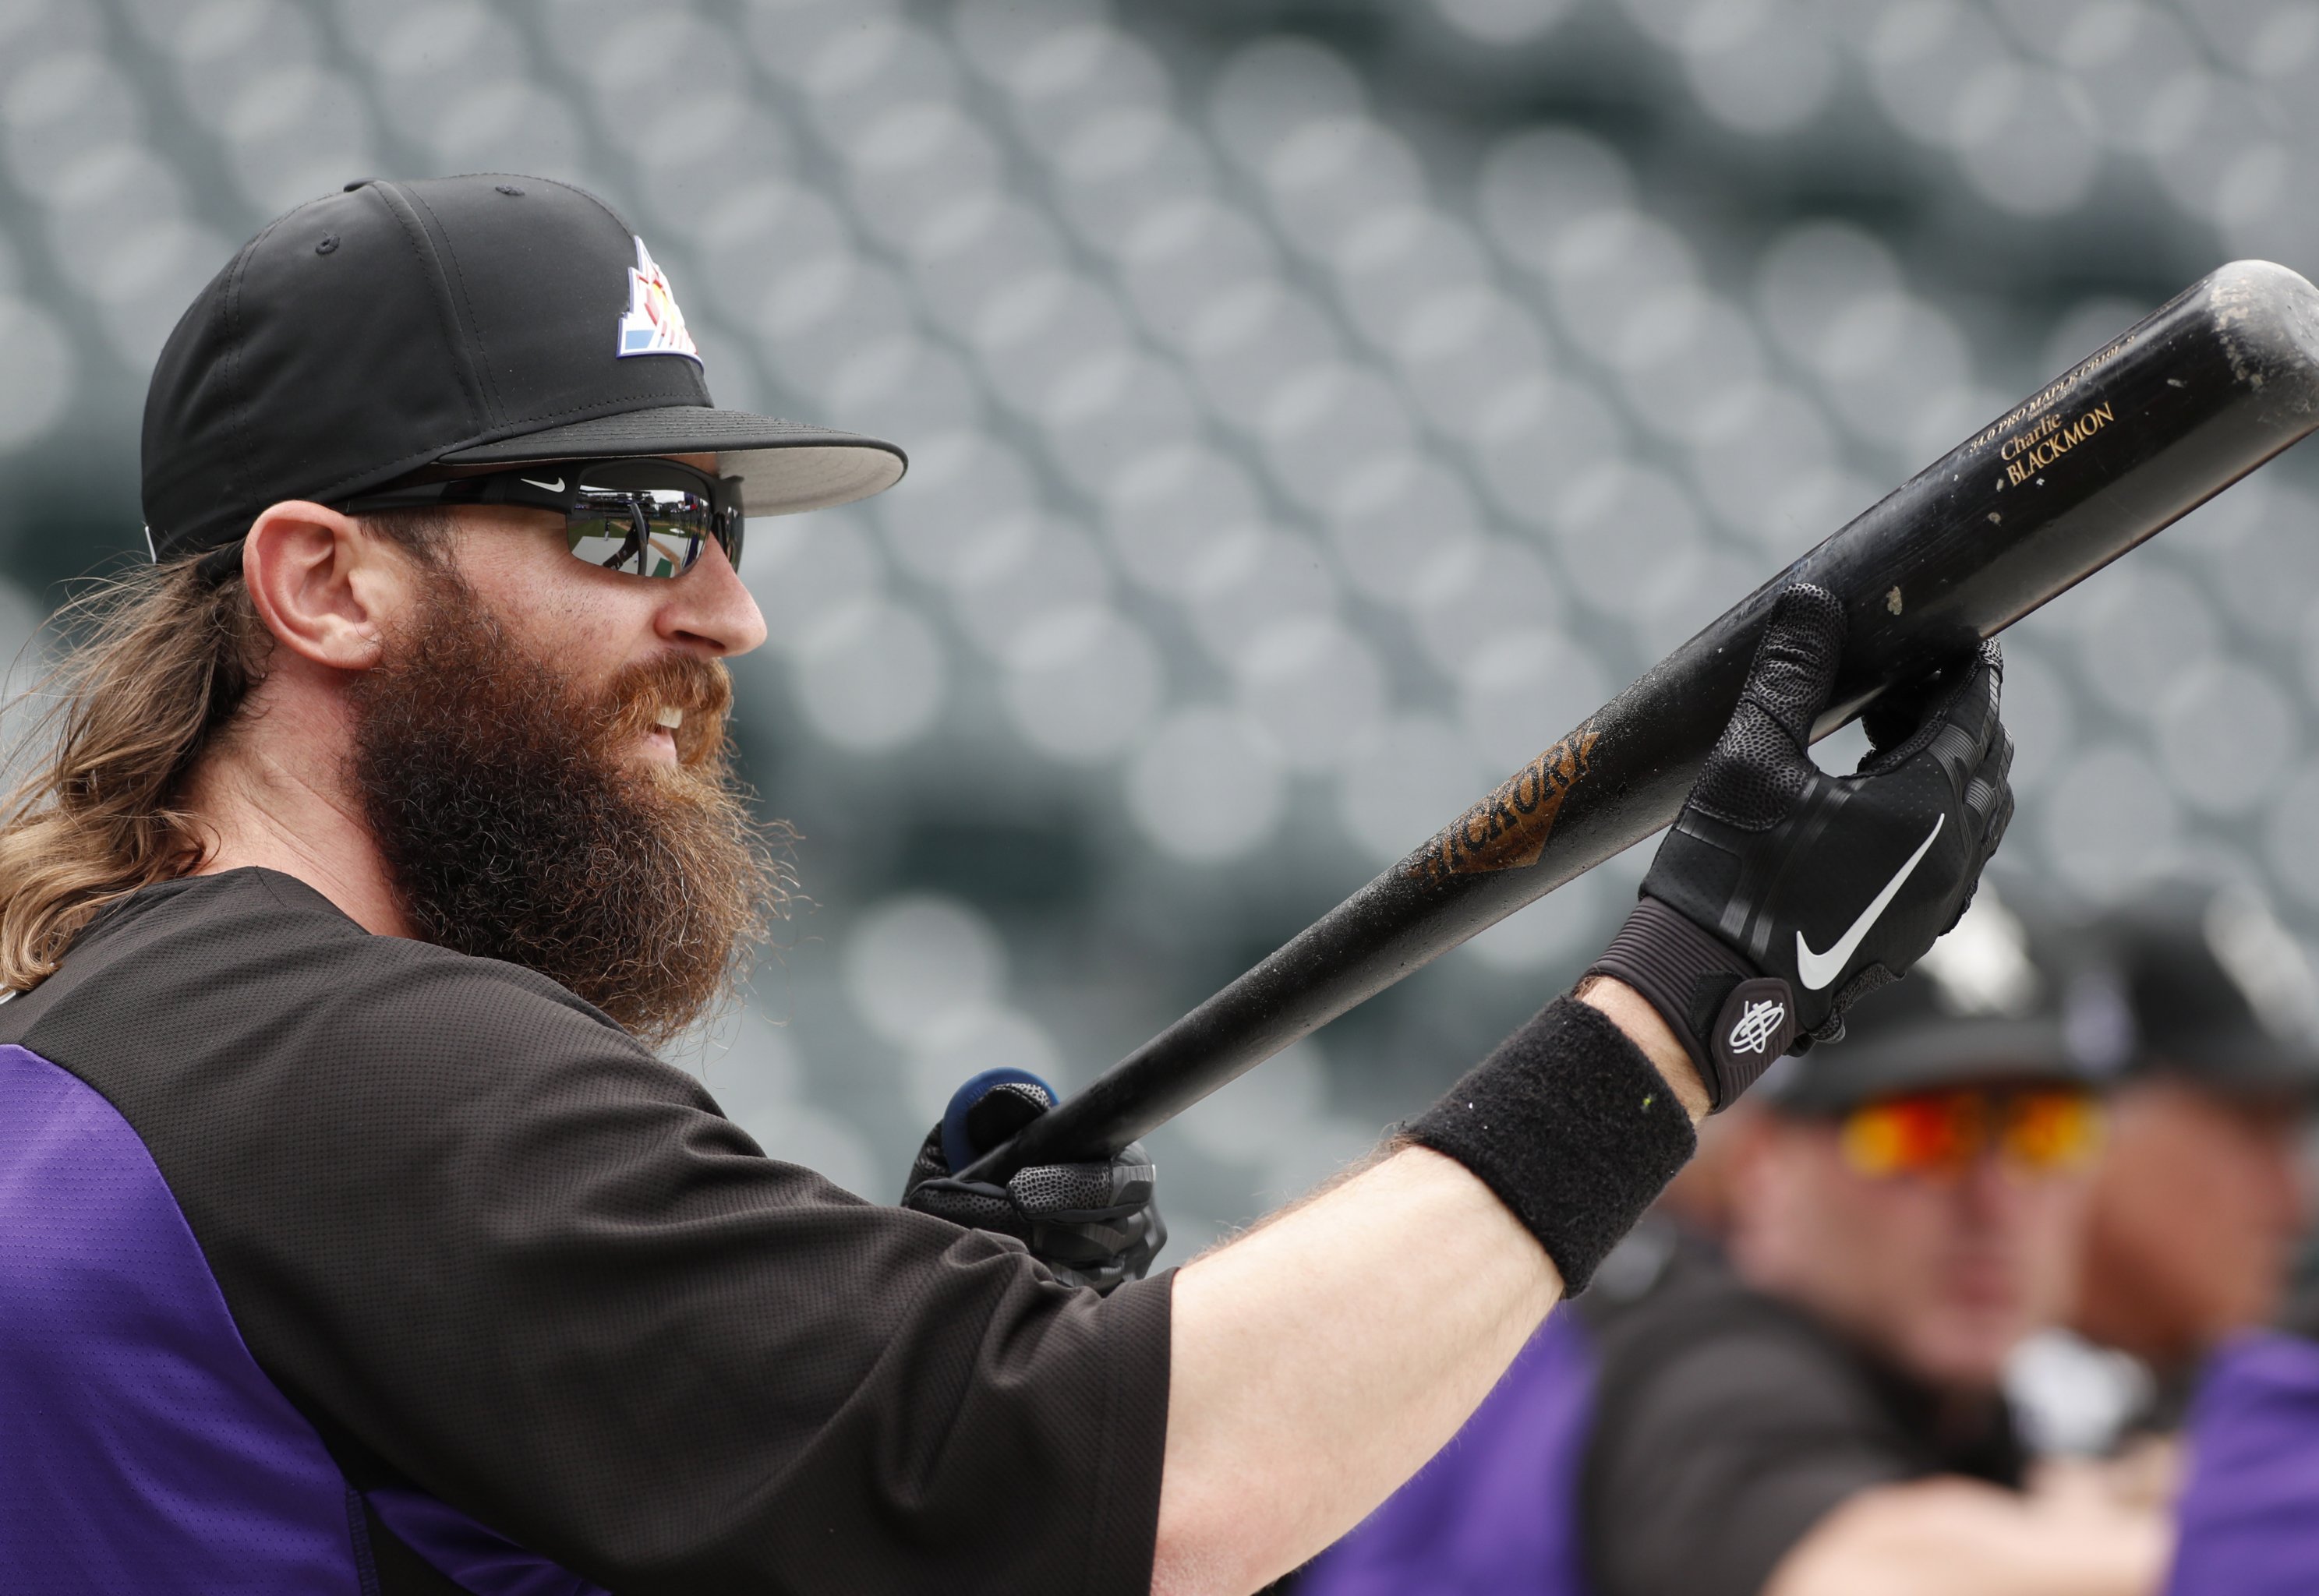 Charlie Blackmon's $108M Deal Suddenly Scary After Steep Fall from